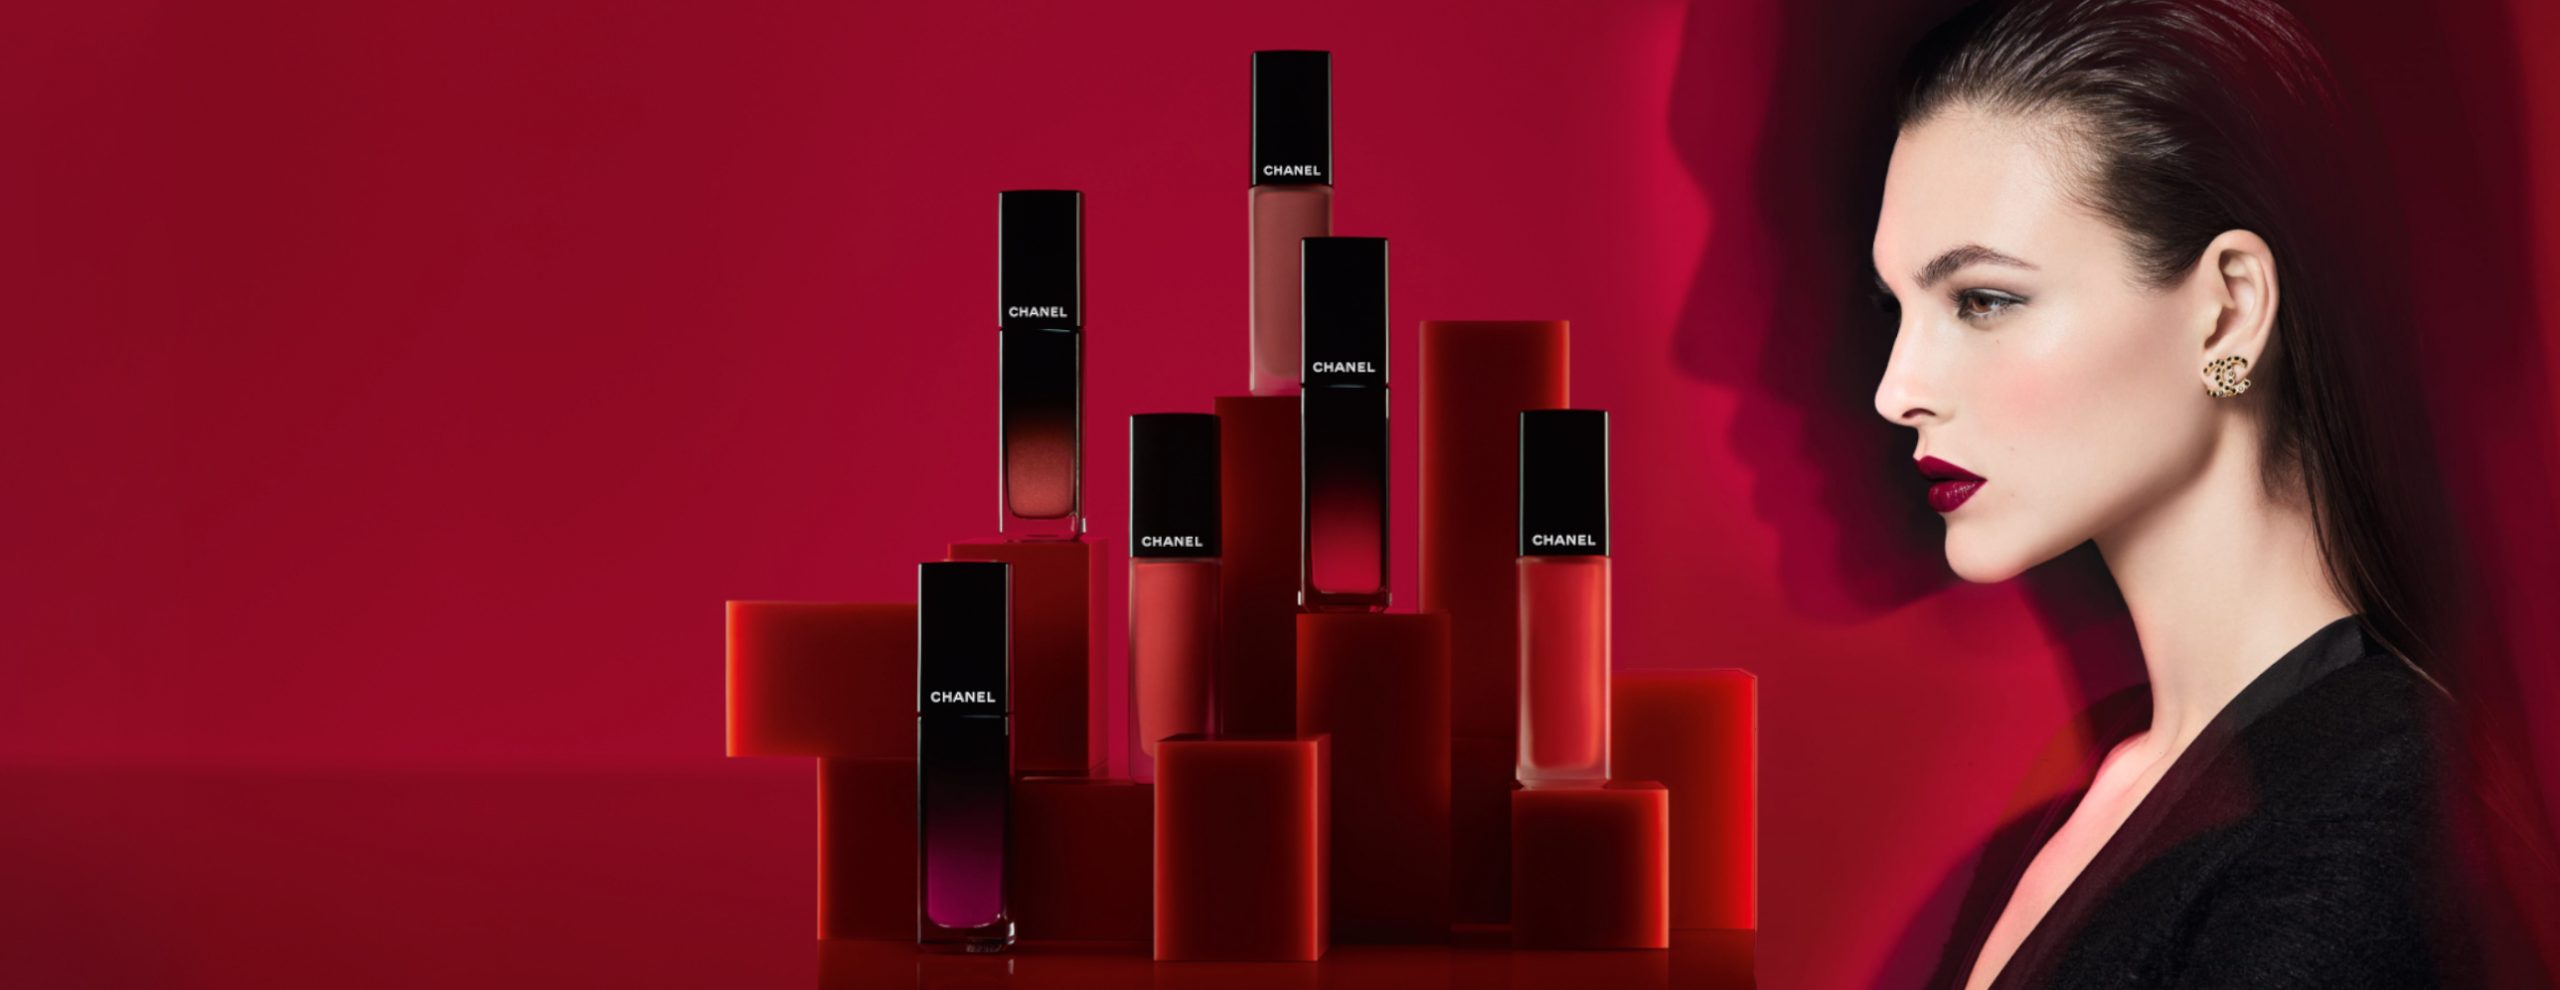 CHANEL Adds 12 New Shades To The ROUGE ALLURE Lipstick Range